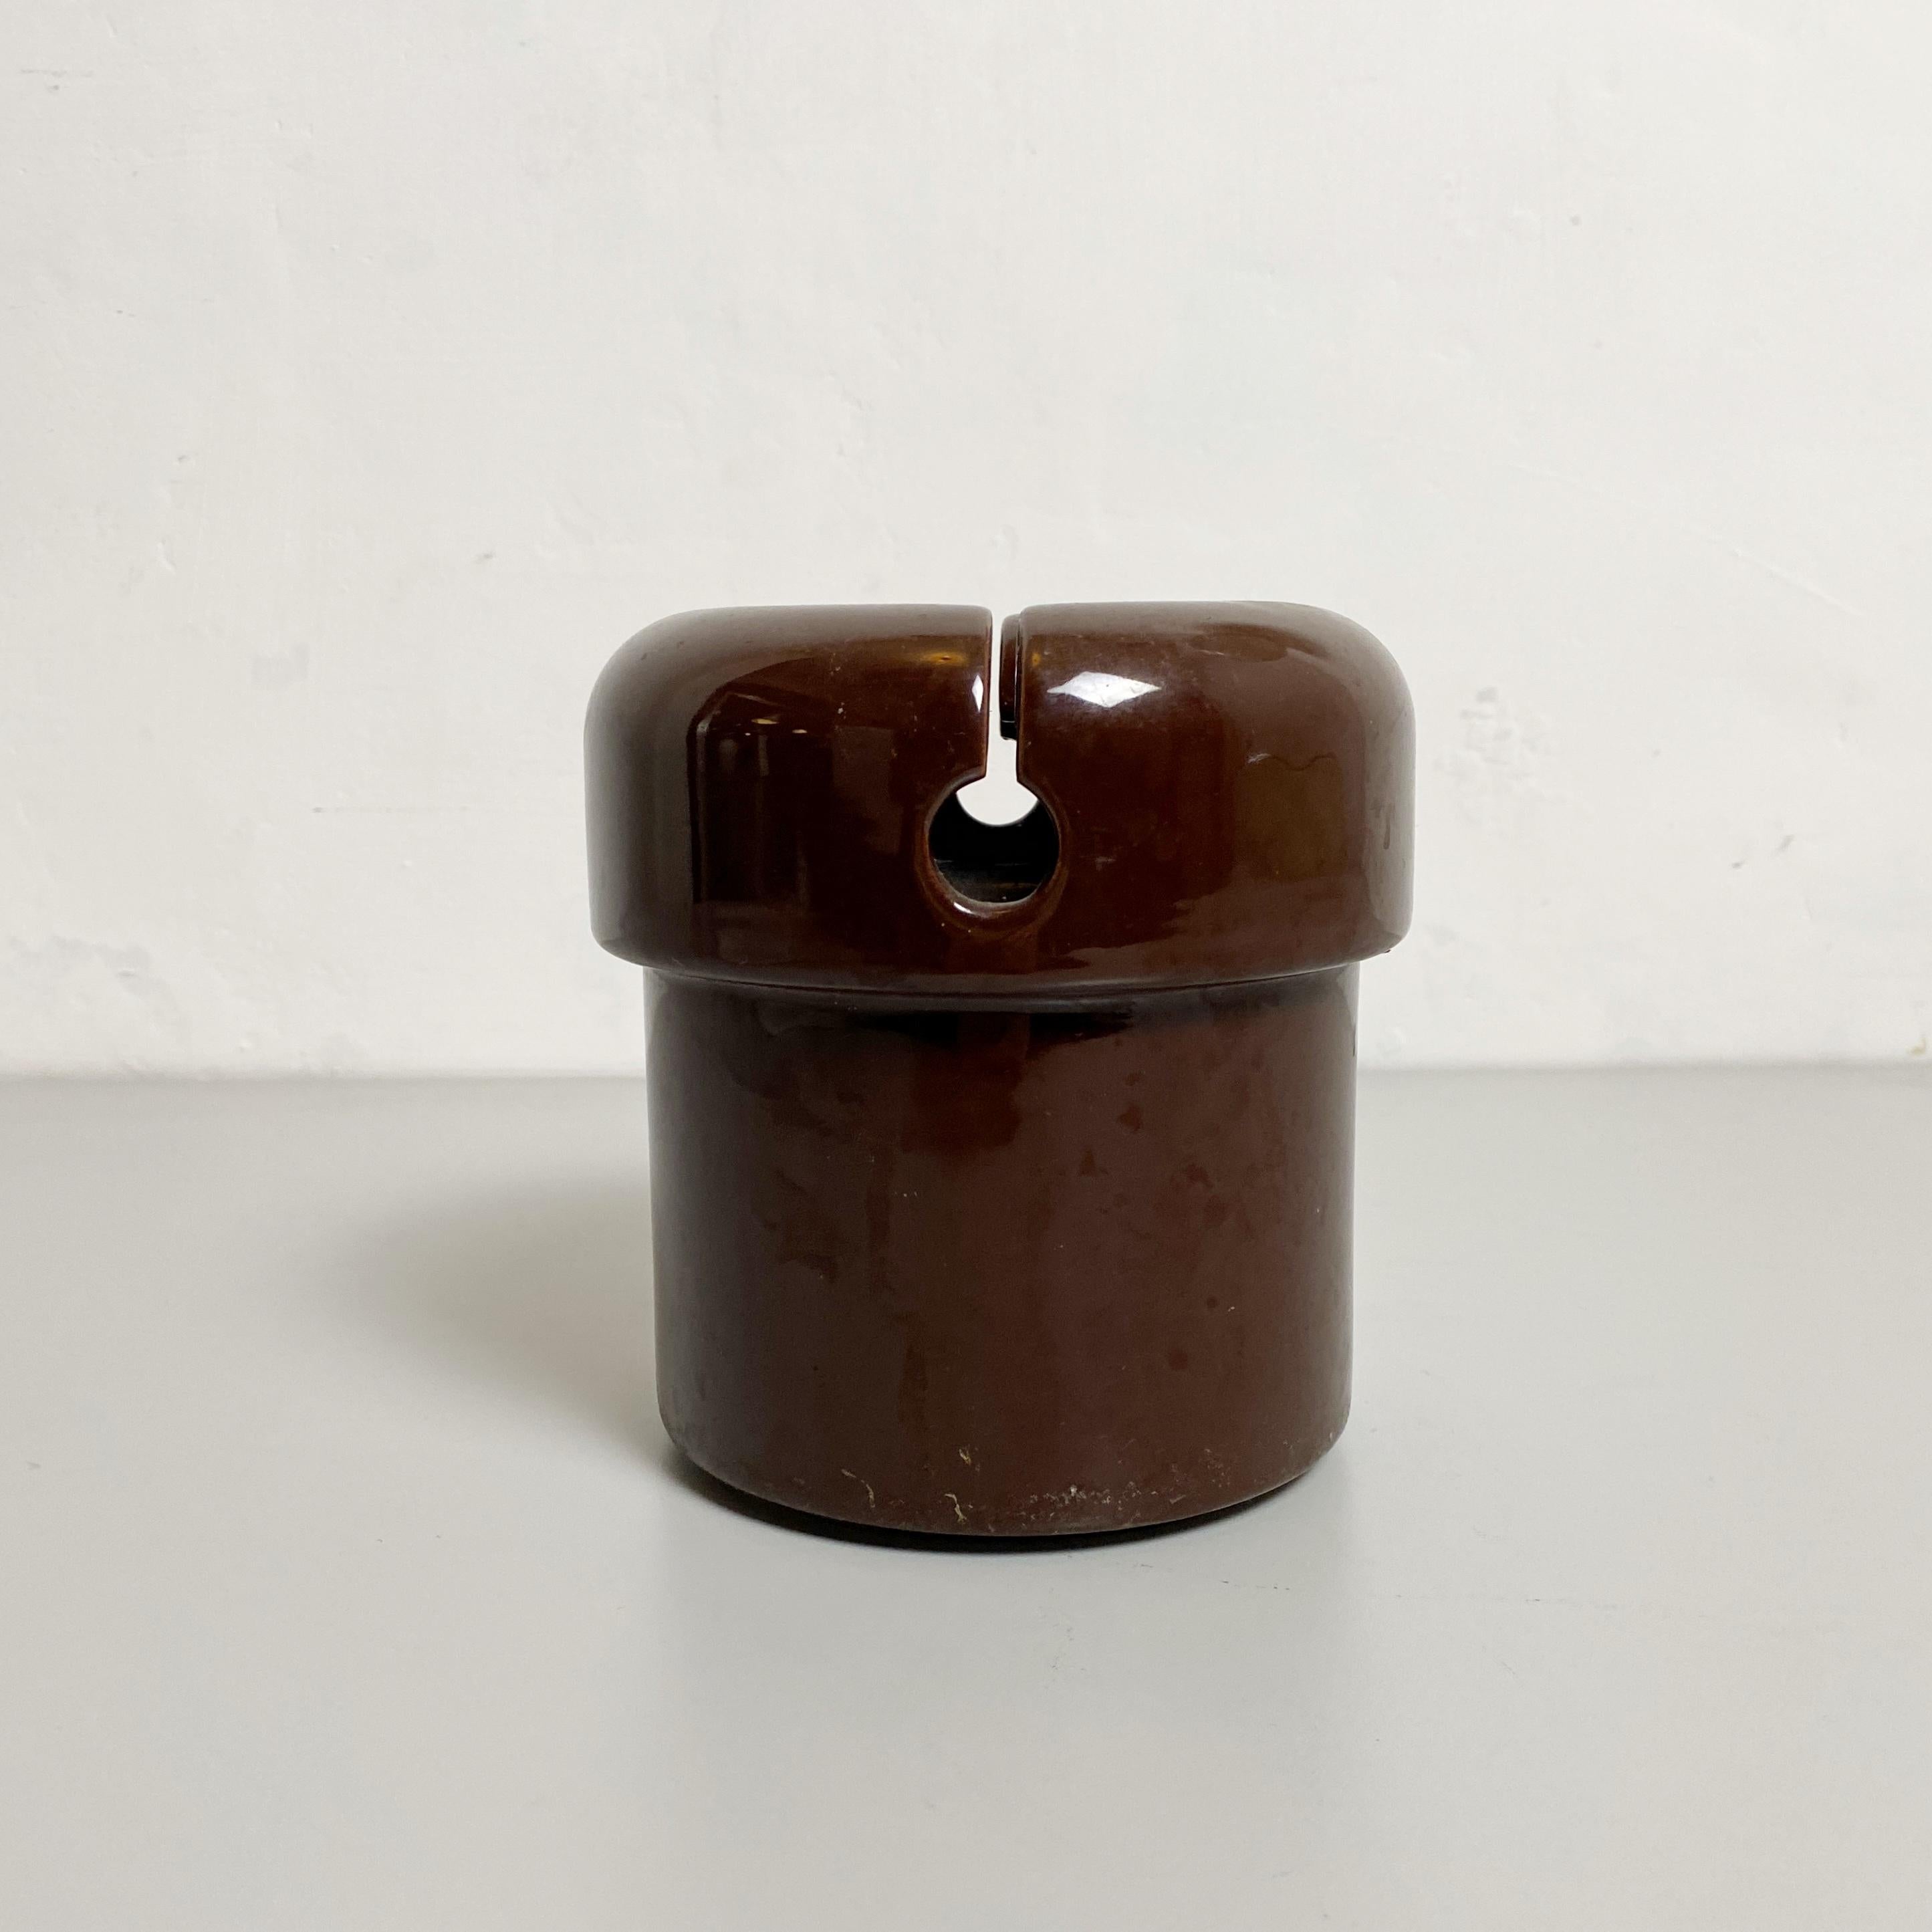 Italian Mid-Century Modern Brown Ceramic Vase by Lineareorm, 1960s For Sale 4